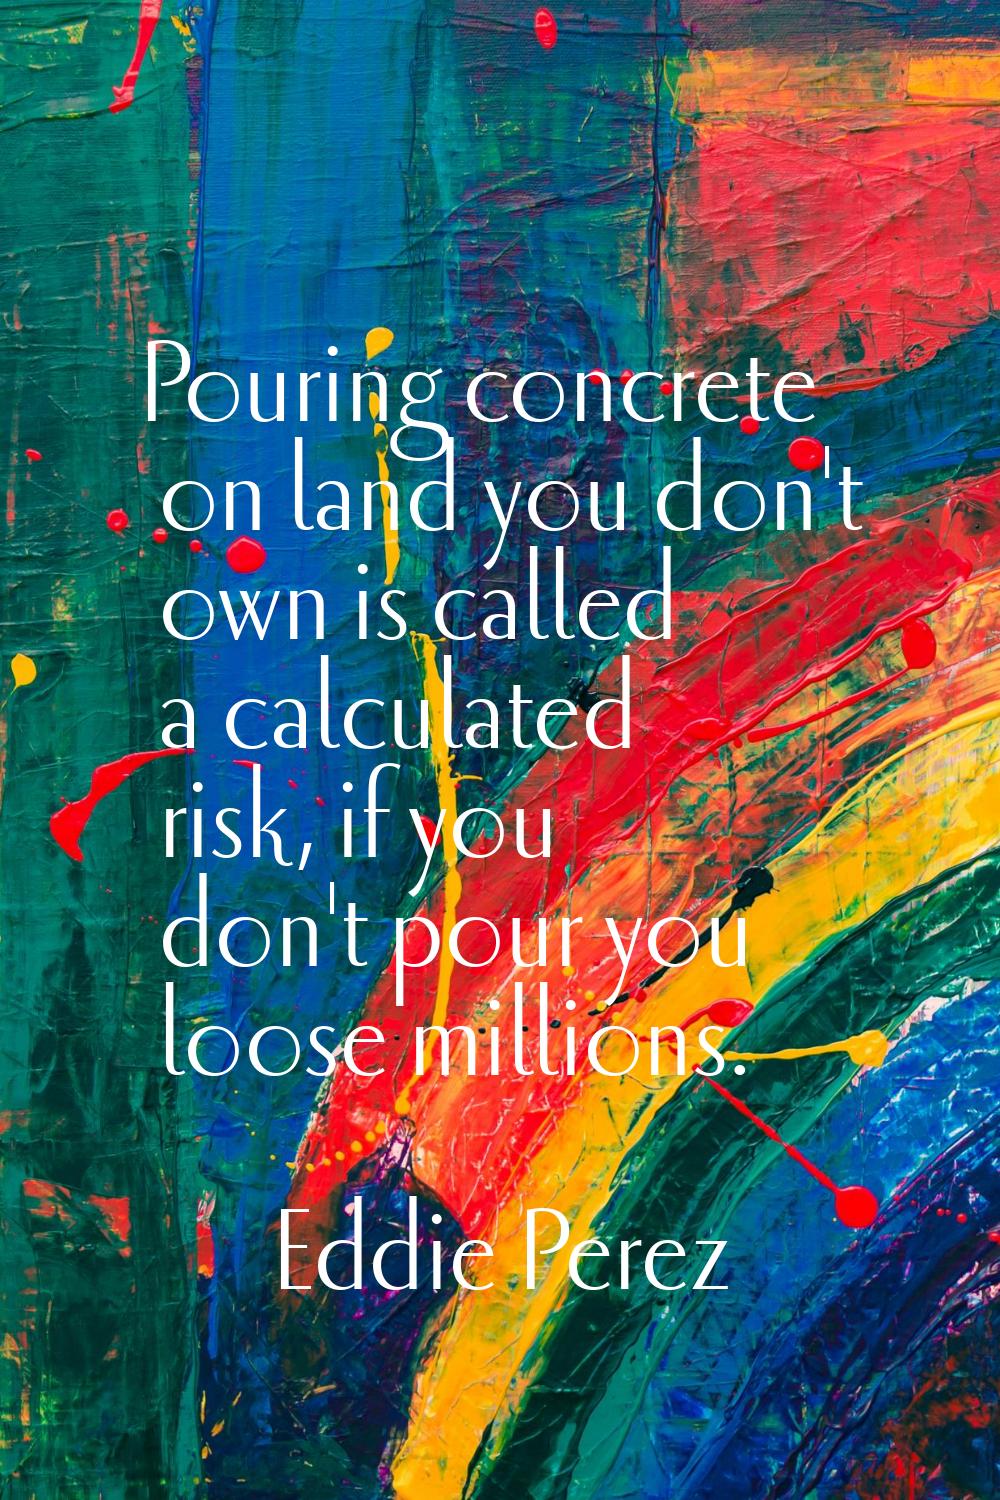 Pouring concrete on land you don't own is called a calculated risk, if you don't pour you loose mil